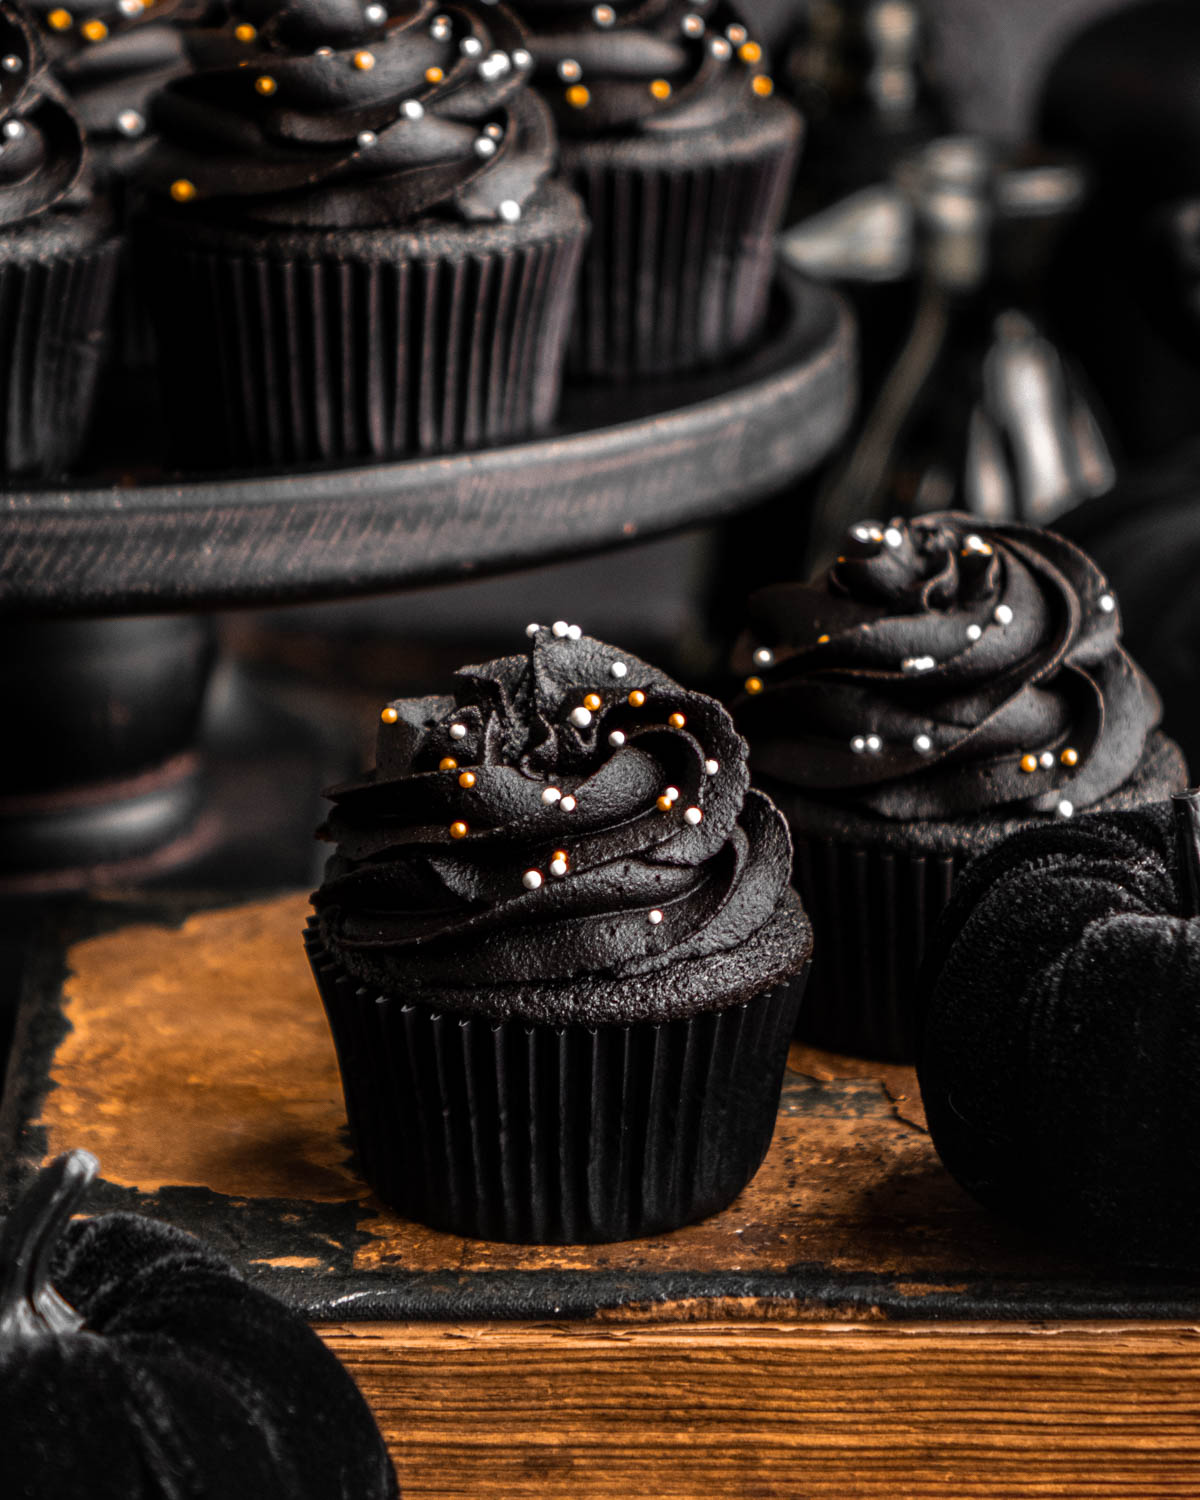 close up of a black velvet cupcake on an old book